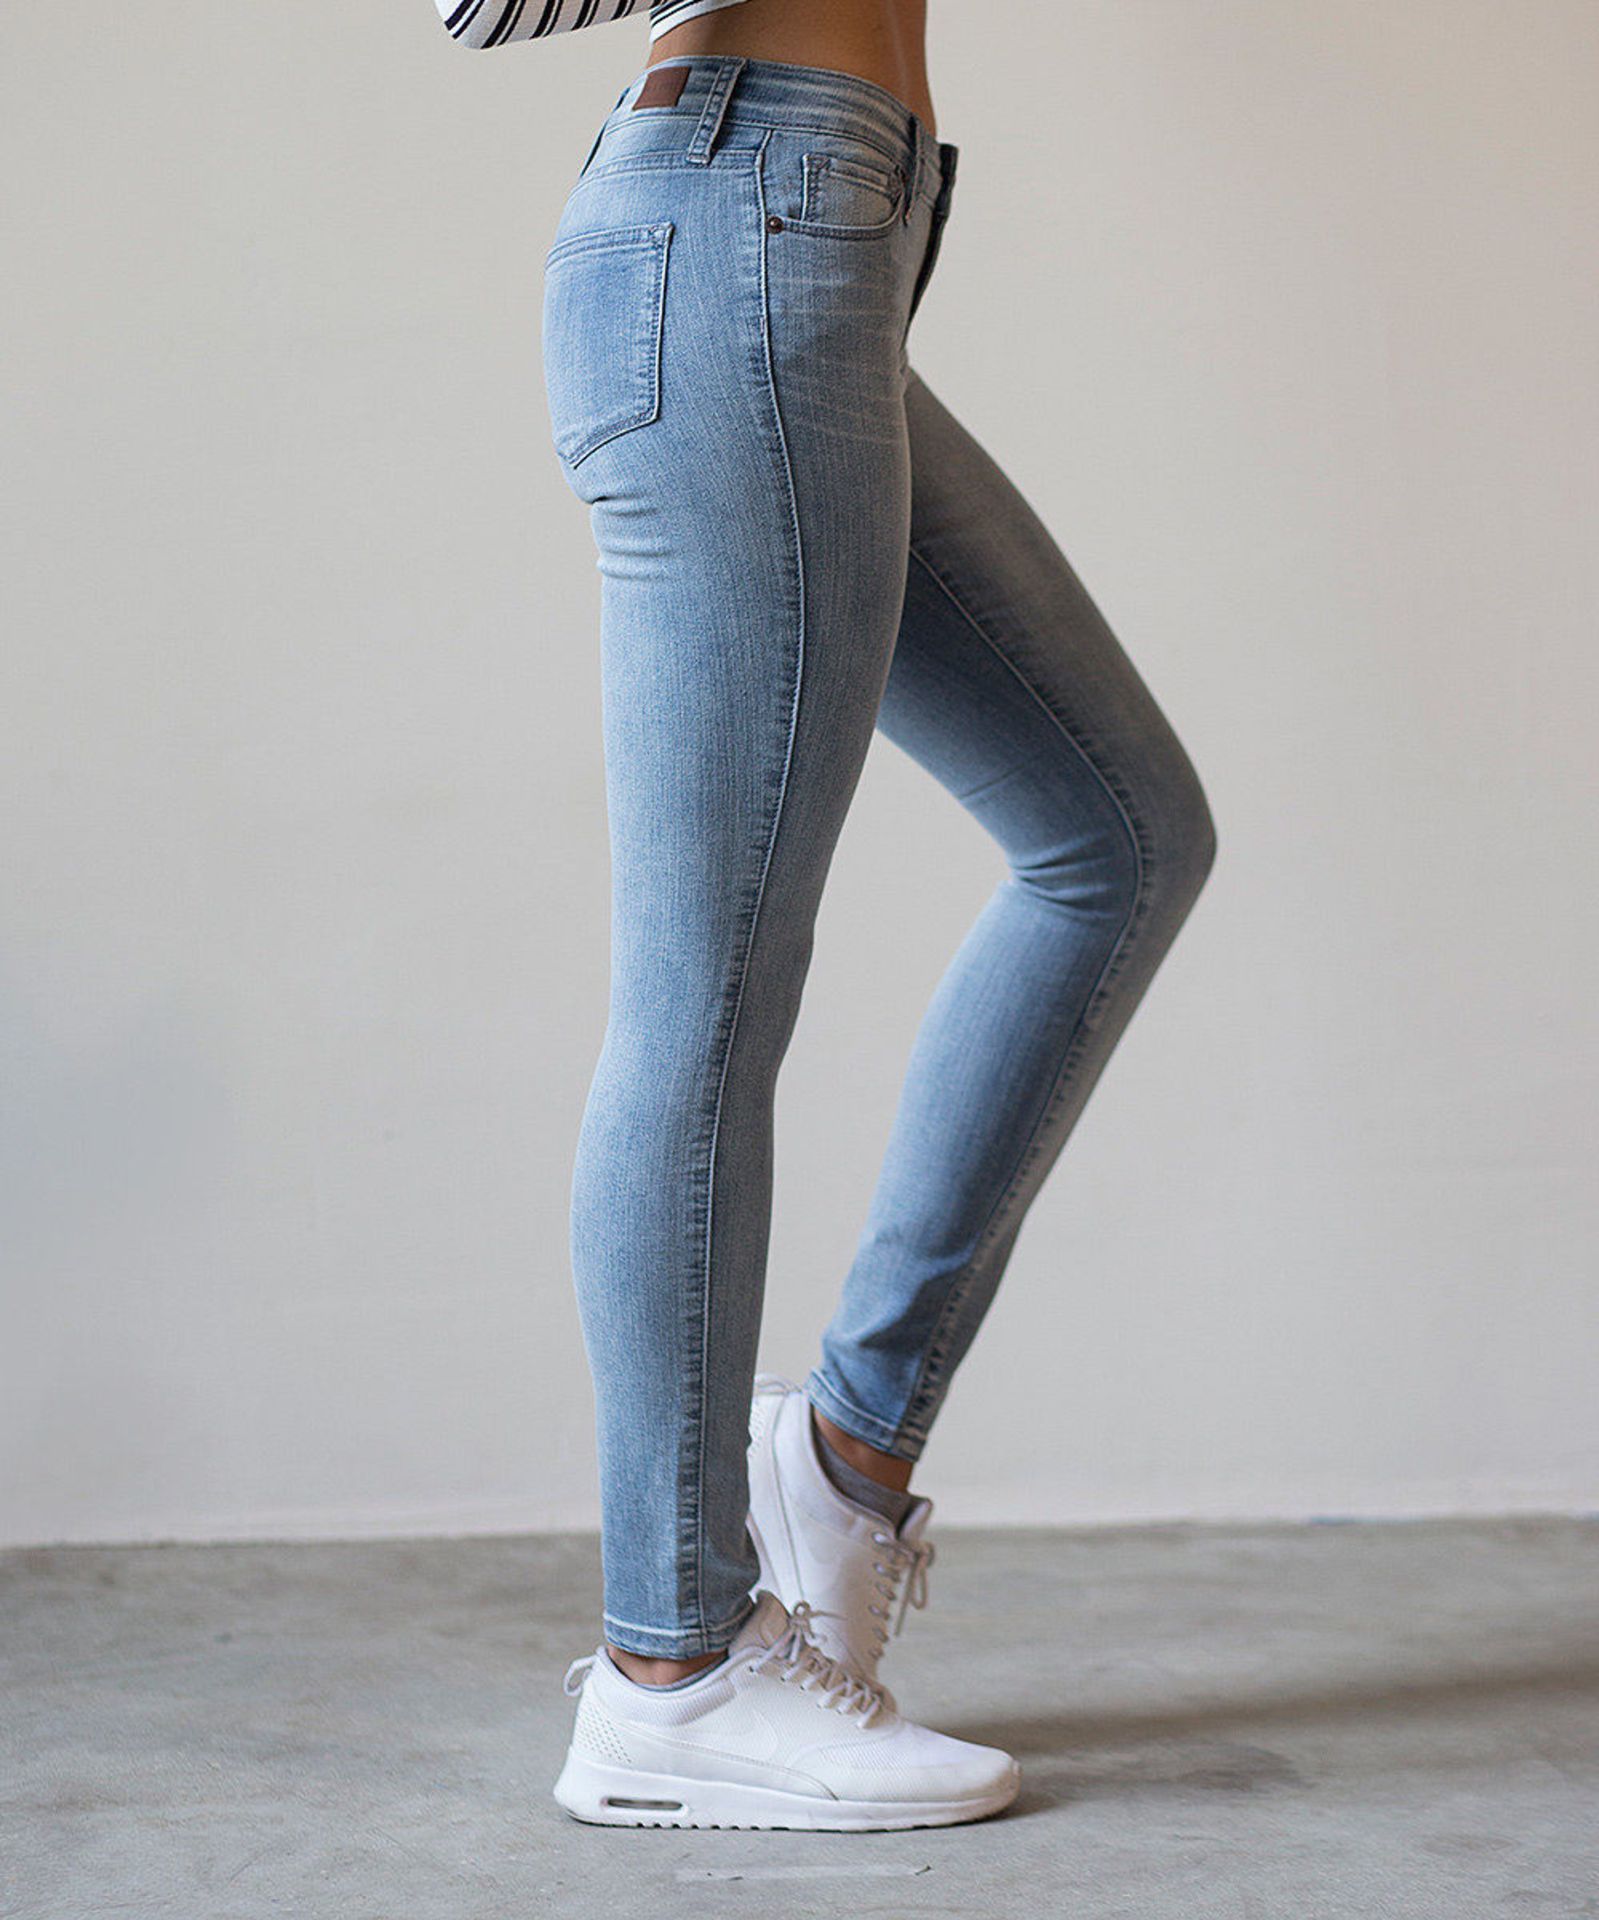 MIA & MOSS, Light Blue Sabine Skinny Jeans, 30" (New with tags) [Ref: 47164611- T-56] - Image 2 of 3